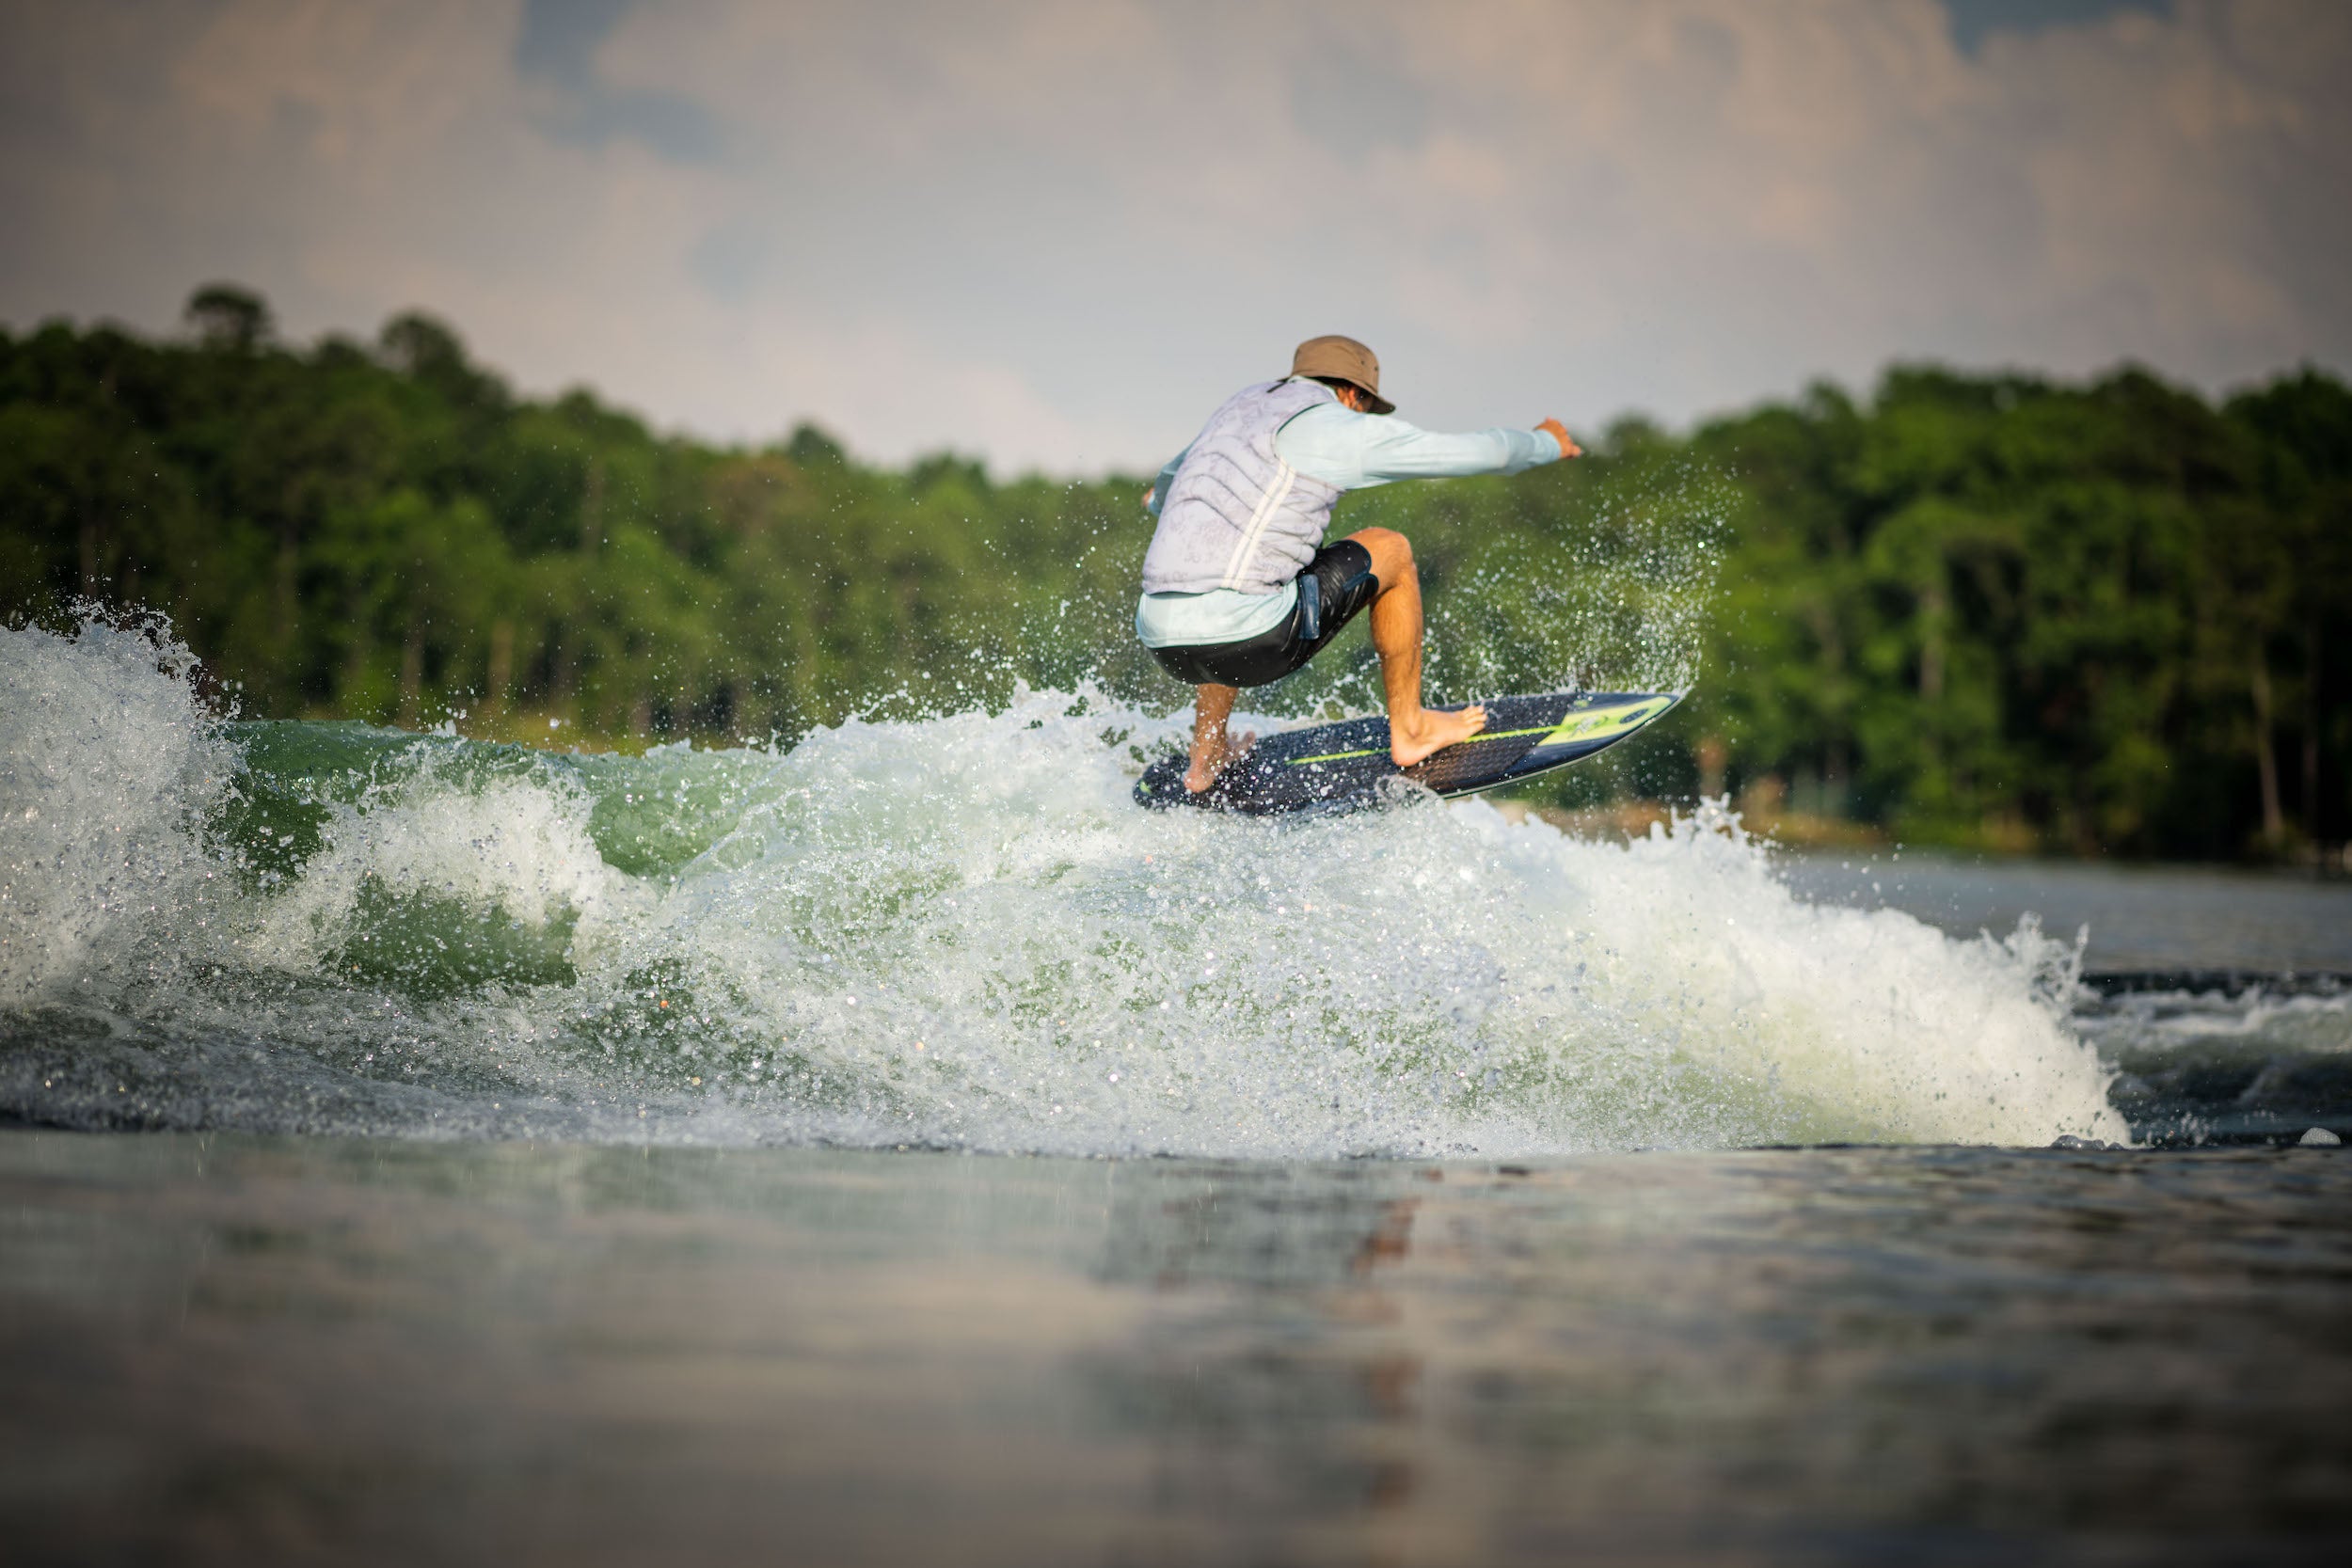 A man is riding a wave on a surfboard, showcasing the Hyperlite 2023 Buzz Wakesurf Board and its DuraShell construction.